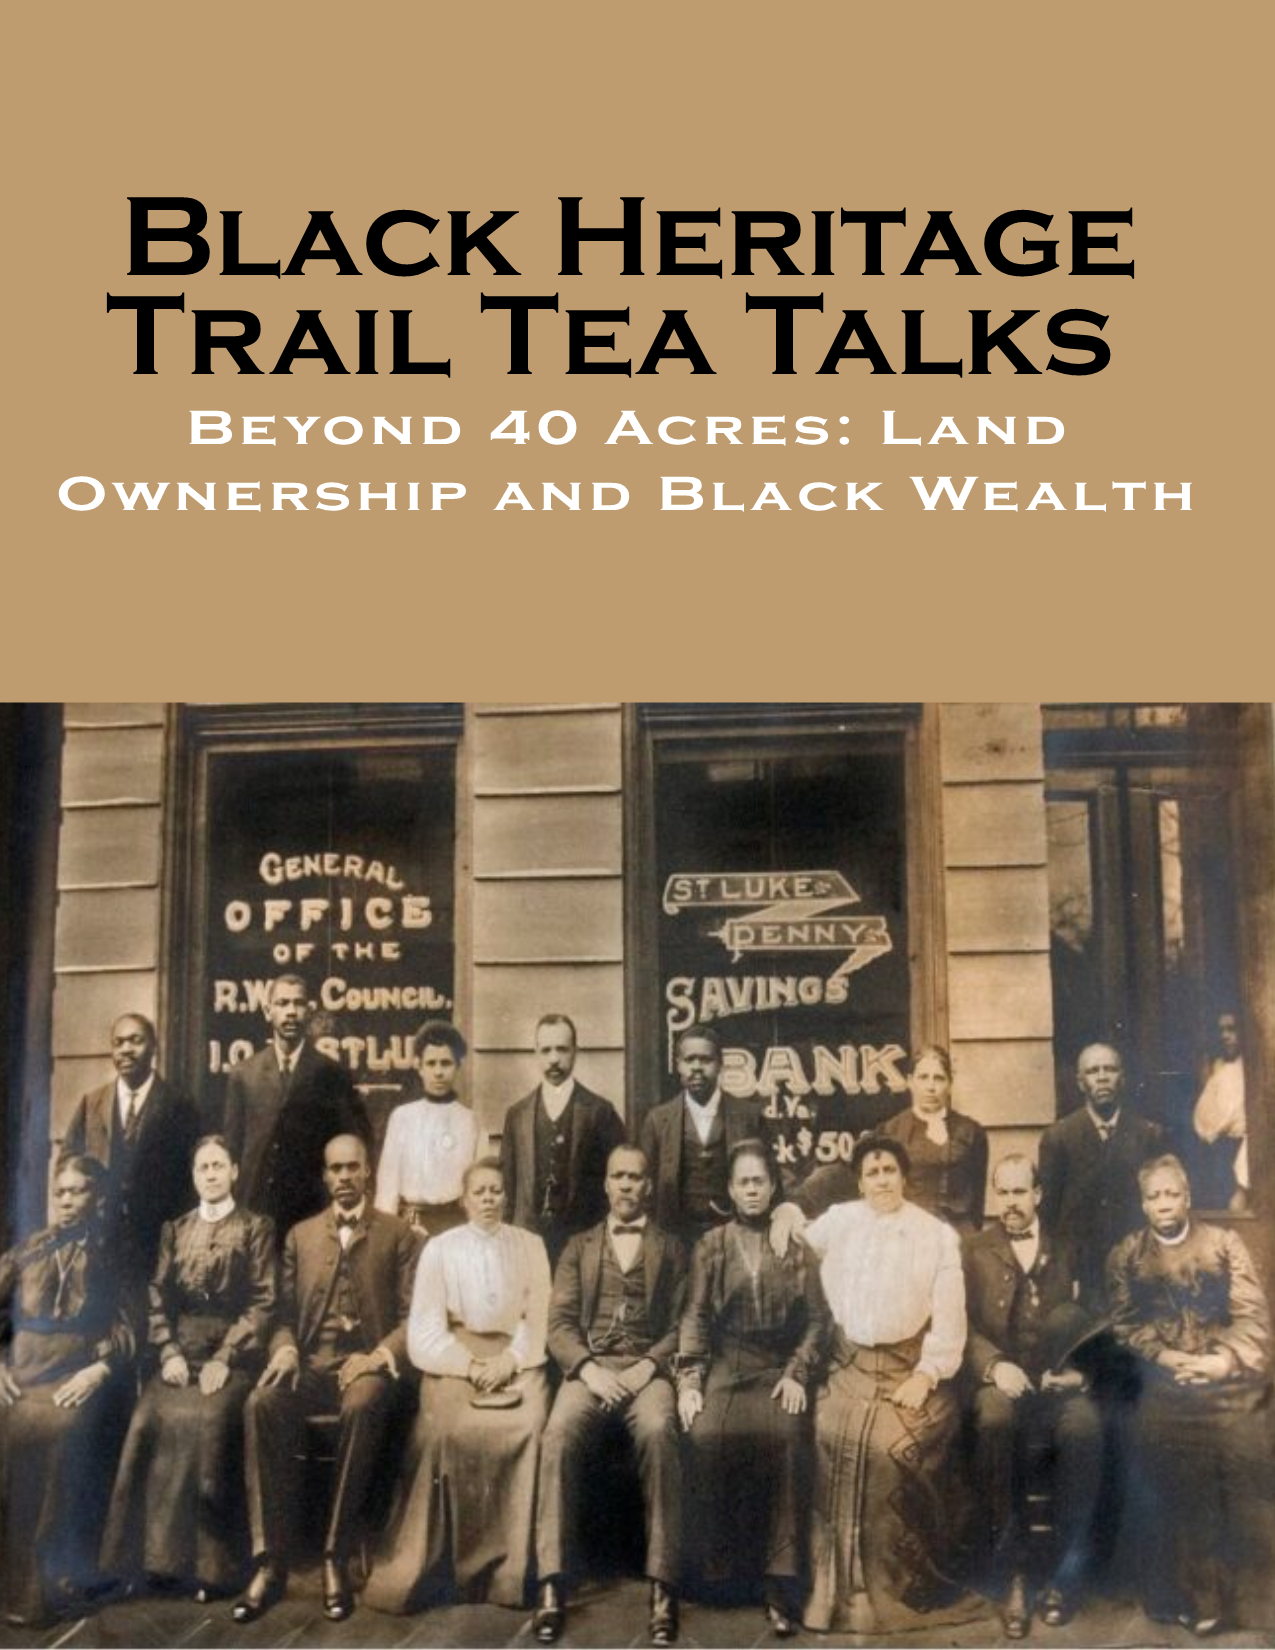 Black Heritage Trail Tea Talks Beyond 40 Acres Land Ownership and Black Wealth Black people sitting in front of a storefront